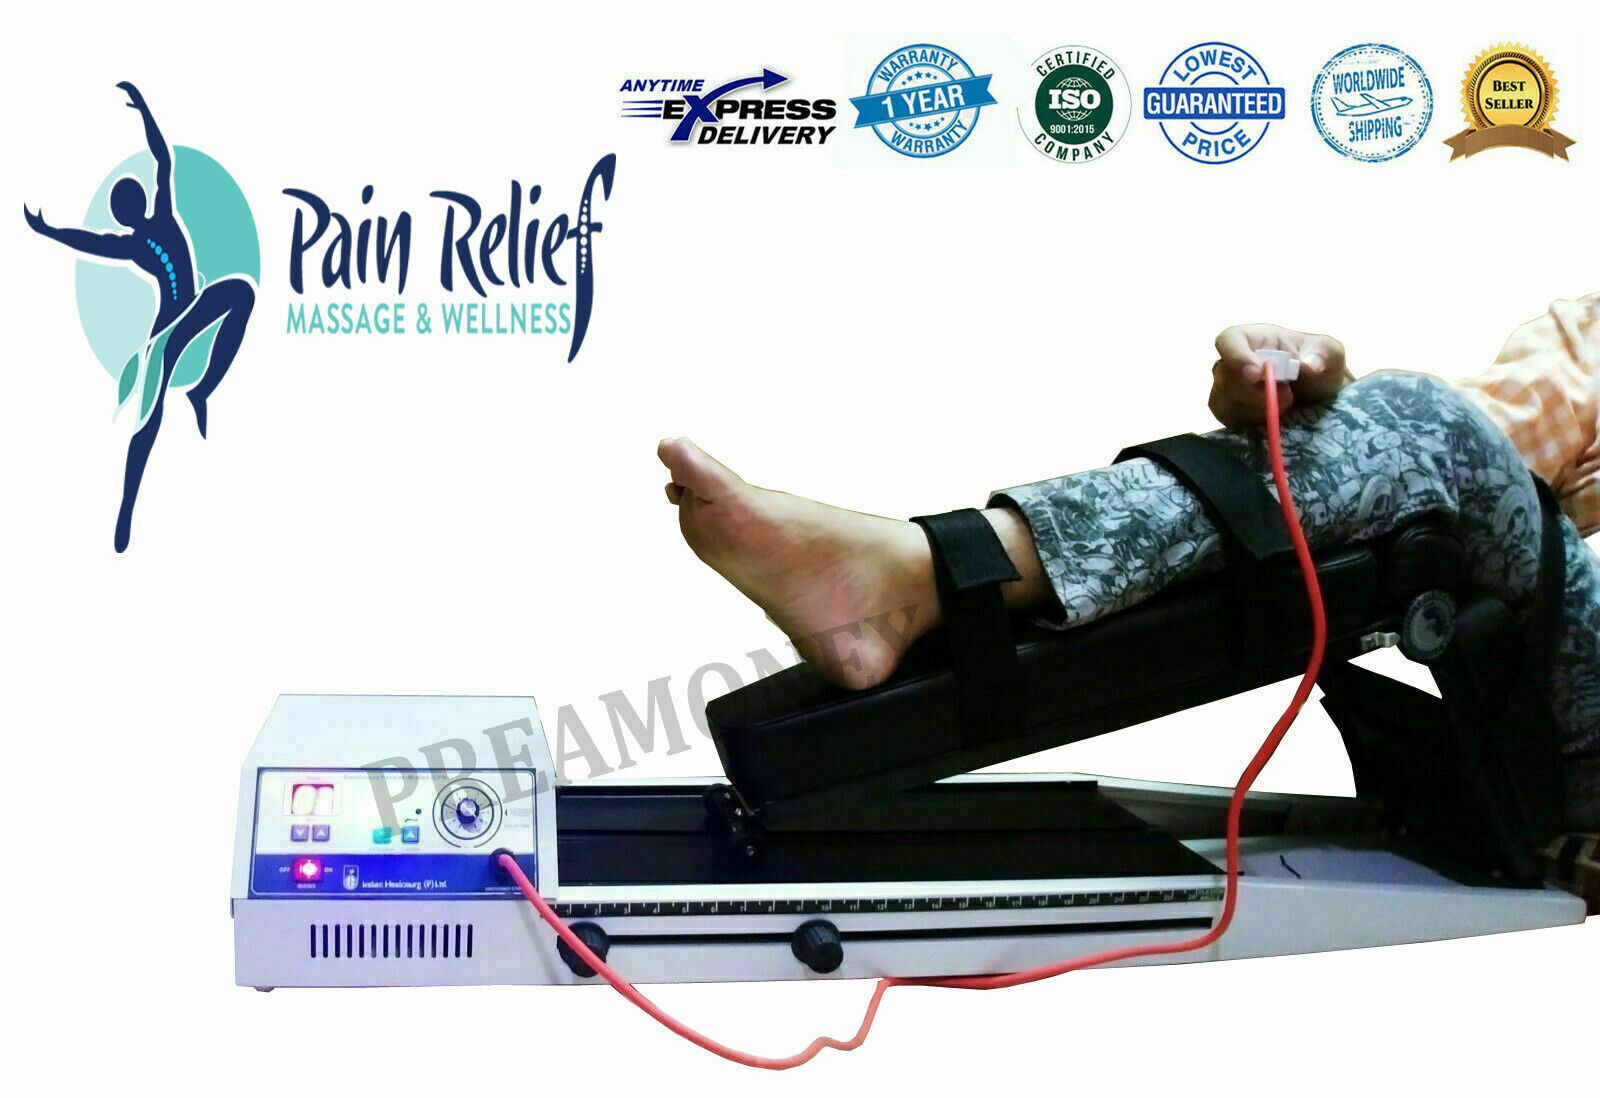 CPM Knee specialty shop Exercise Physiotherapy Passive Continuous Smooth Overseas parallel import regular item Motion